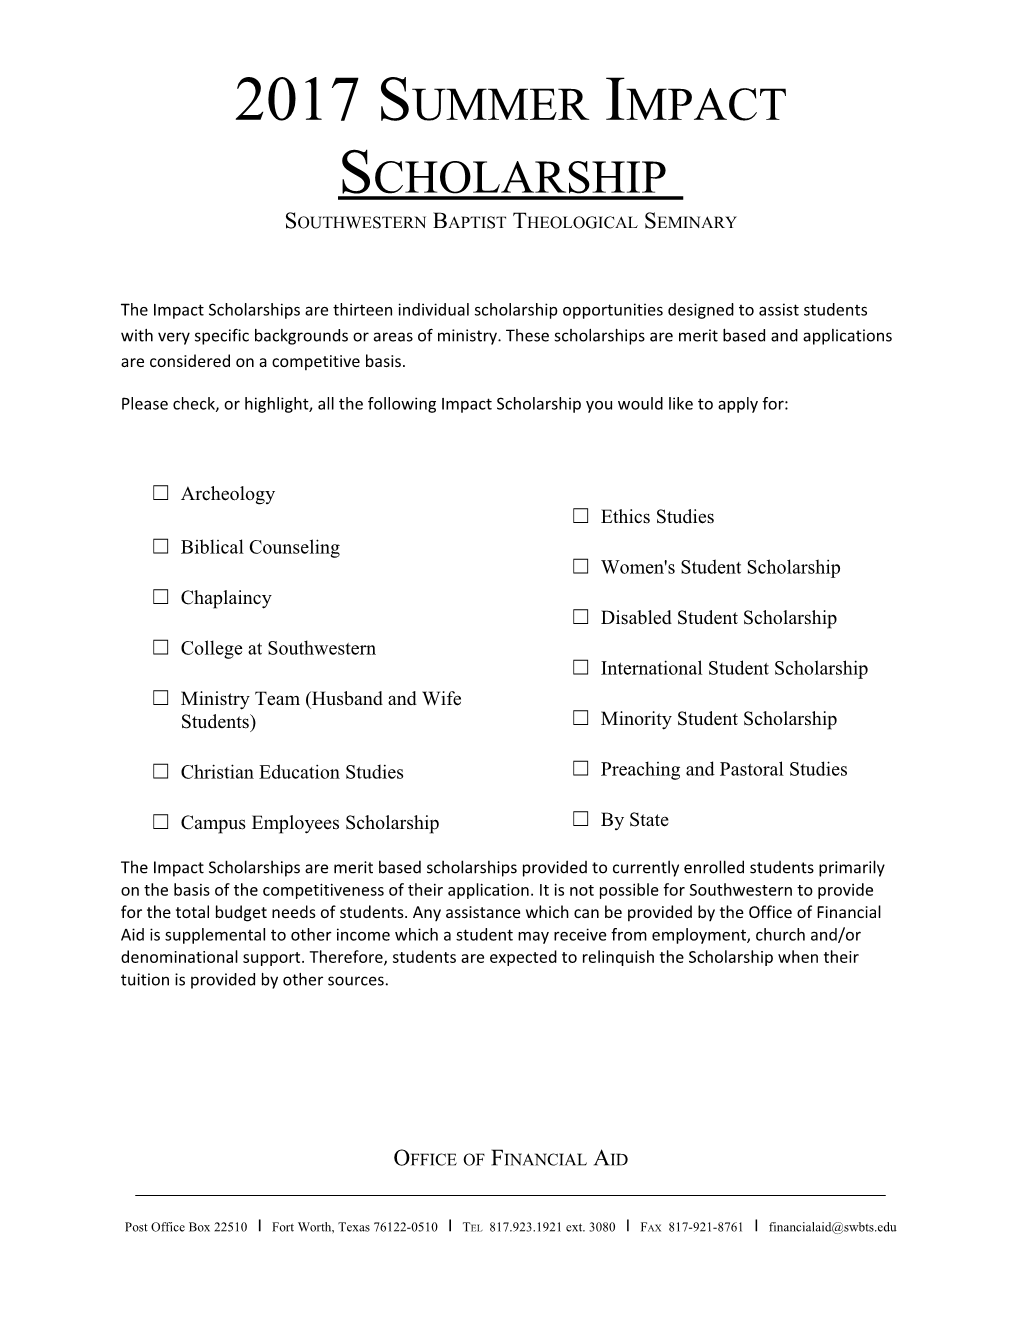 Please Check, Or Highlight, All the Following Impact Scholarship You Would Like to Apply For